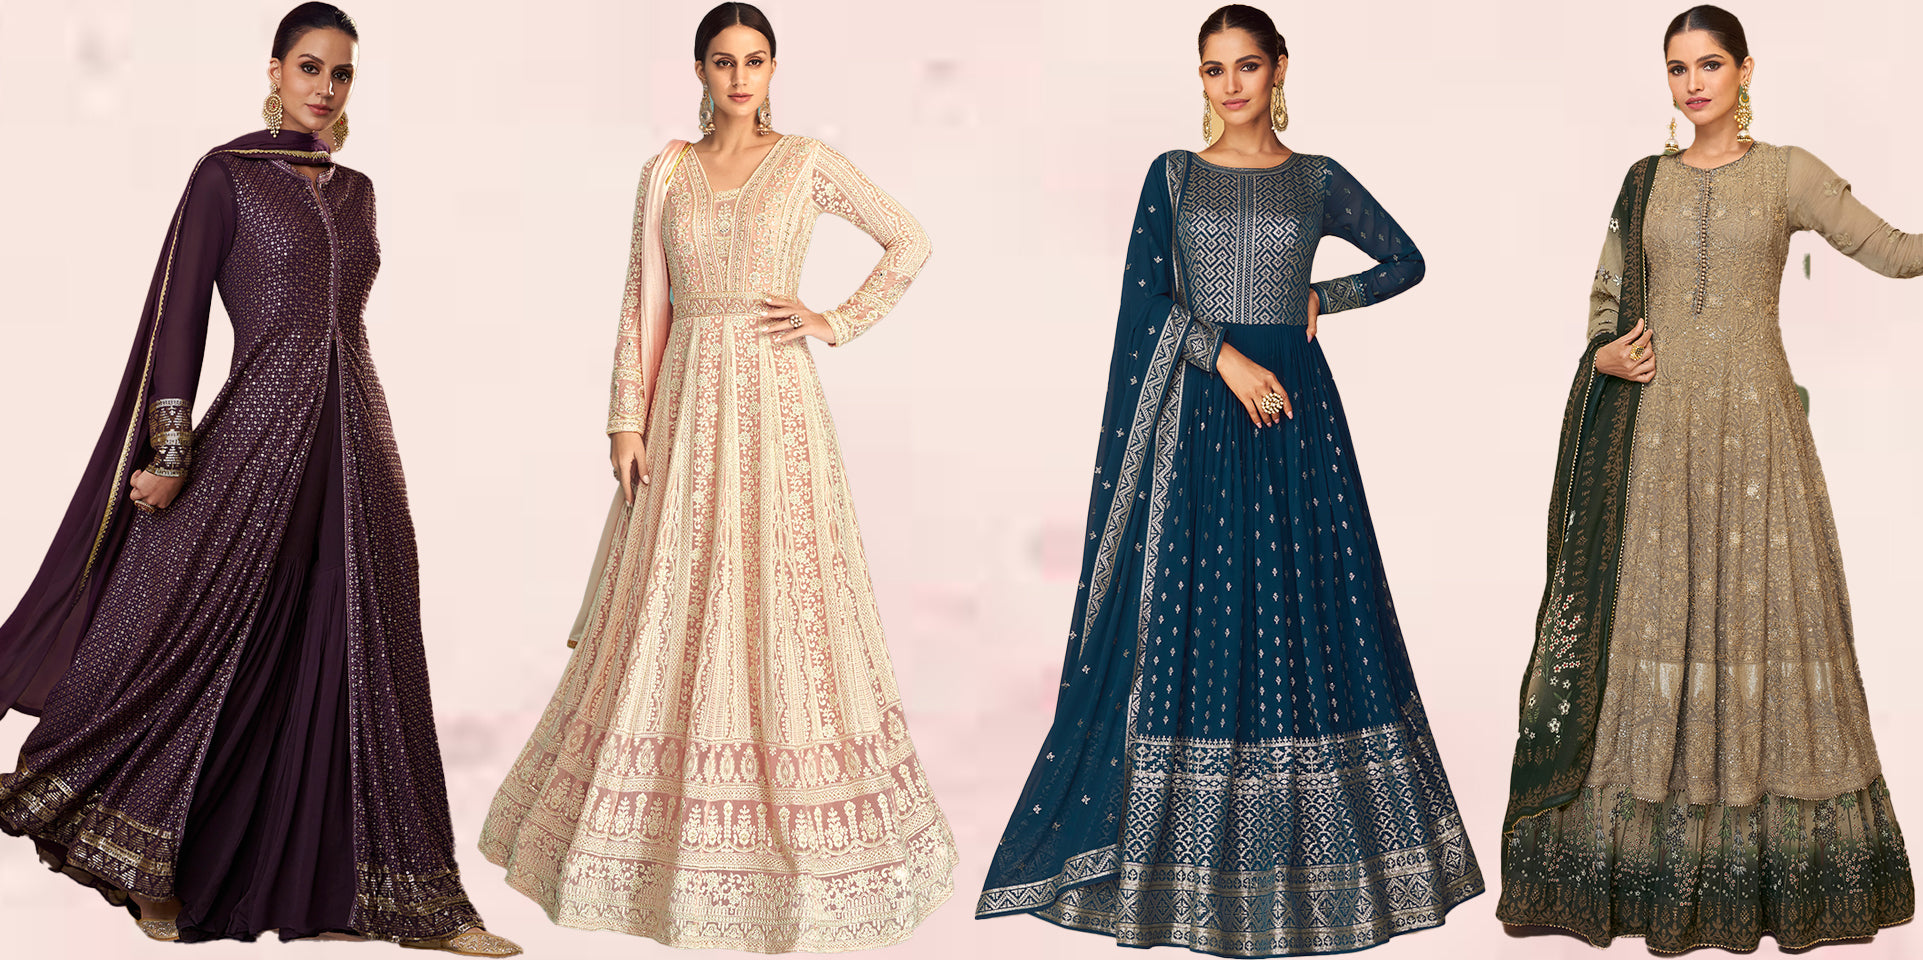 Why Should You Add Anarkali Suits to Your Wardrobe?